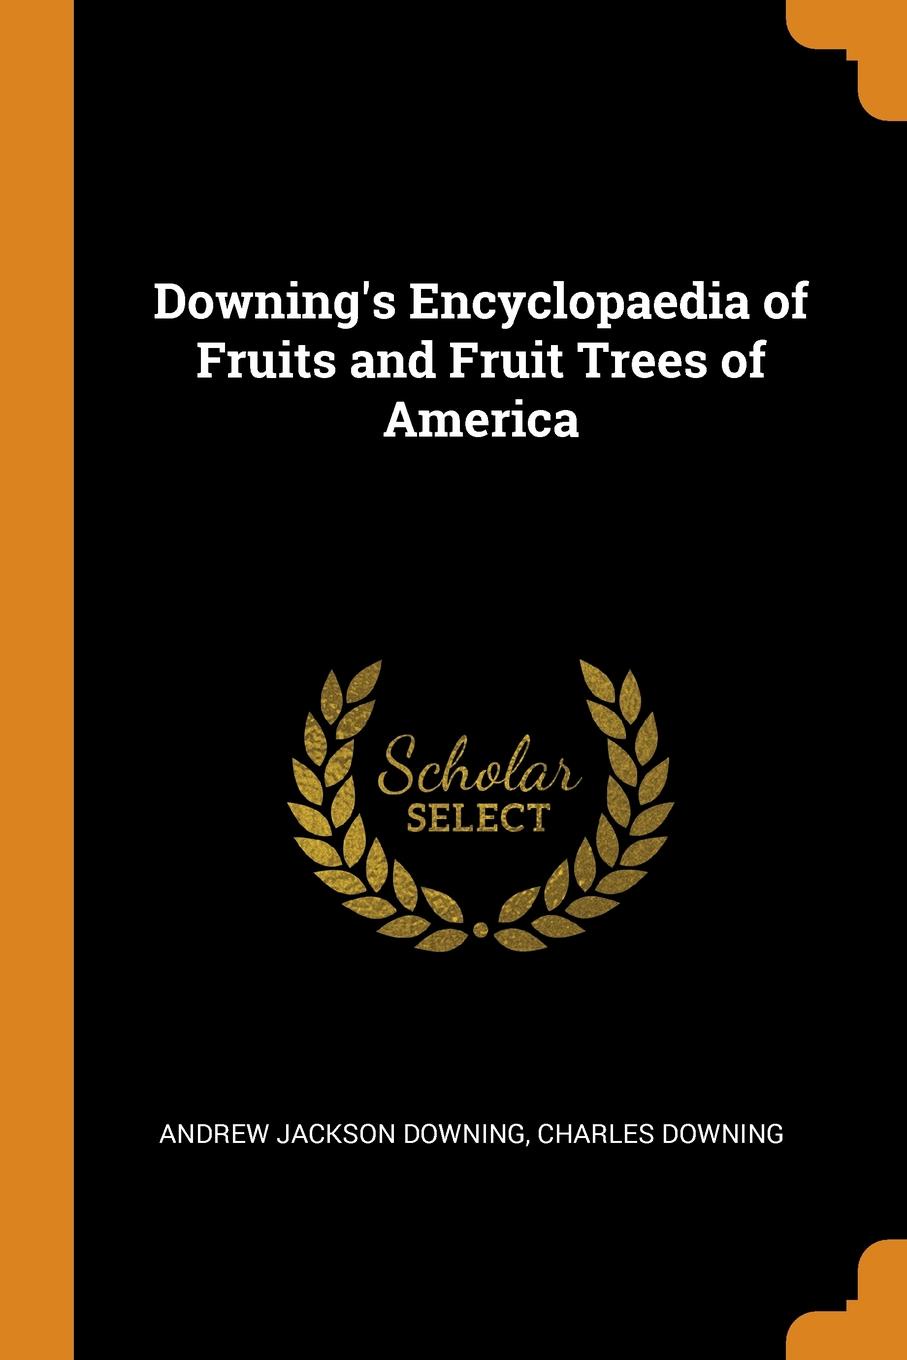 фото Downing.s Encyclopaedia of Fruits and Fruit Trees of America